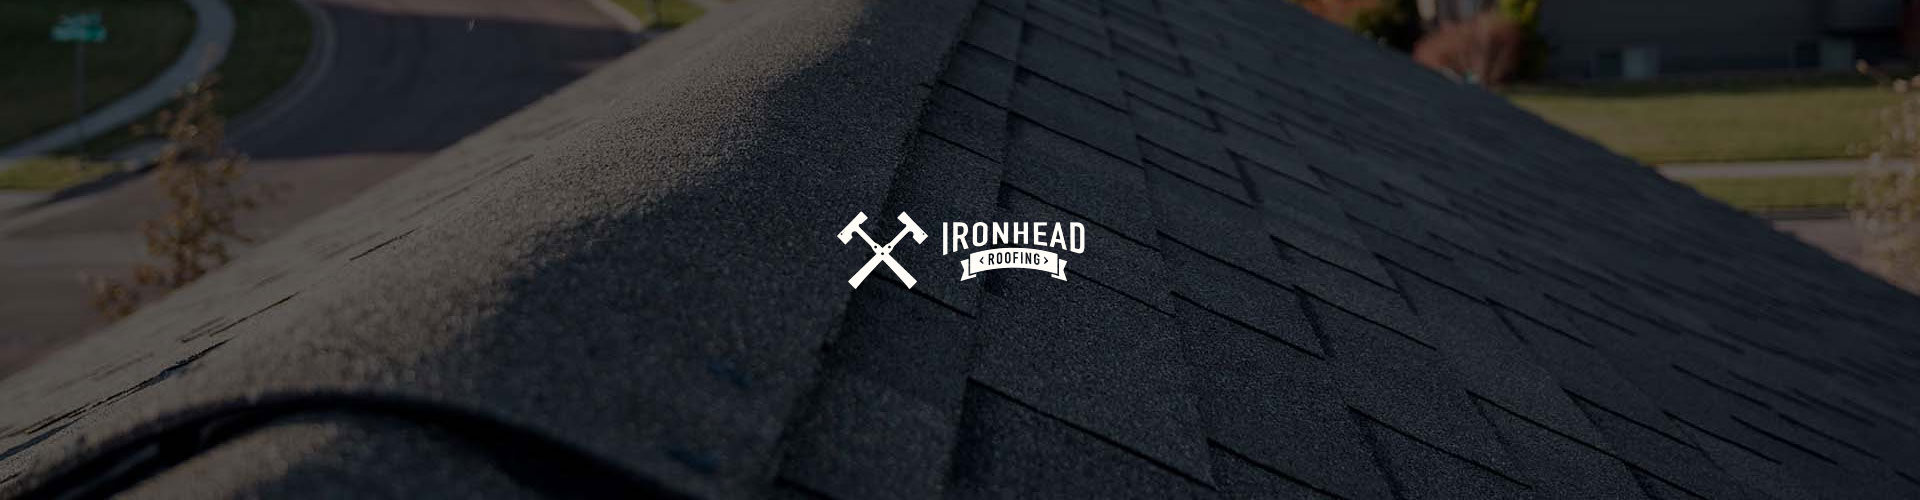 Ironhead Roofing banner